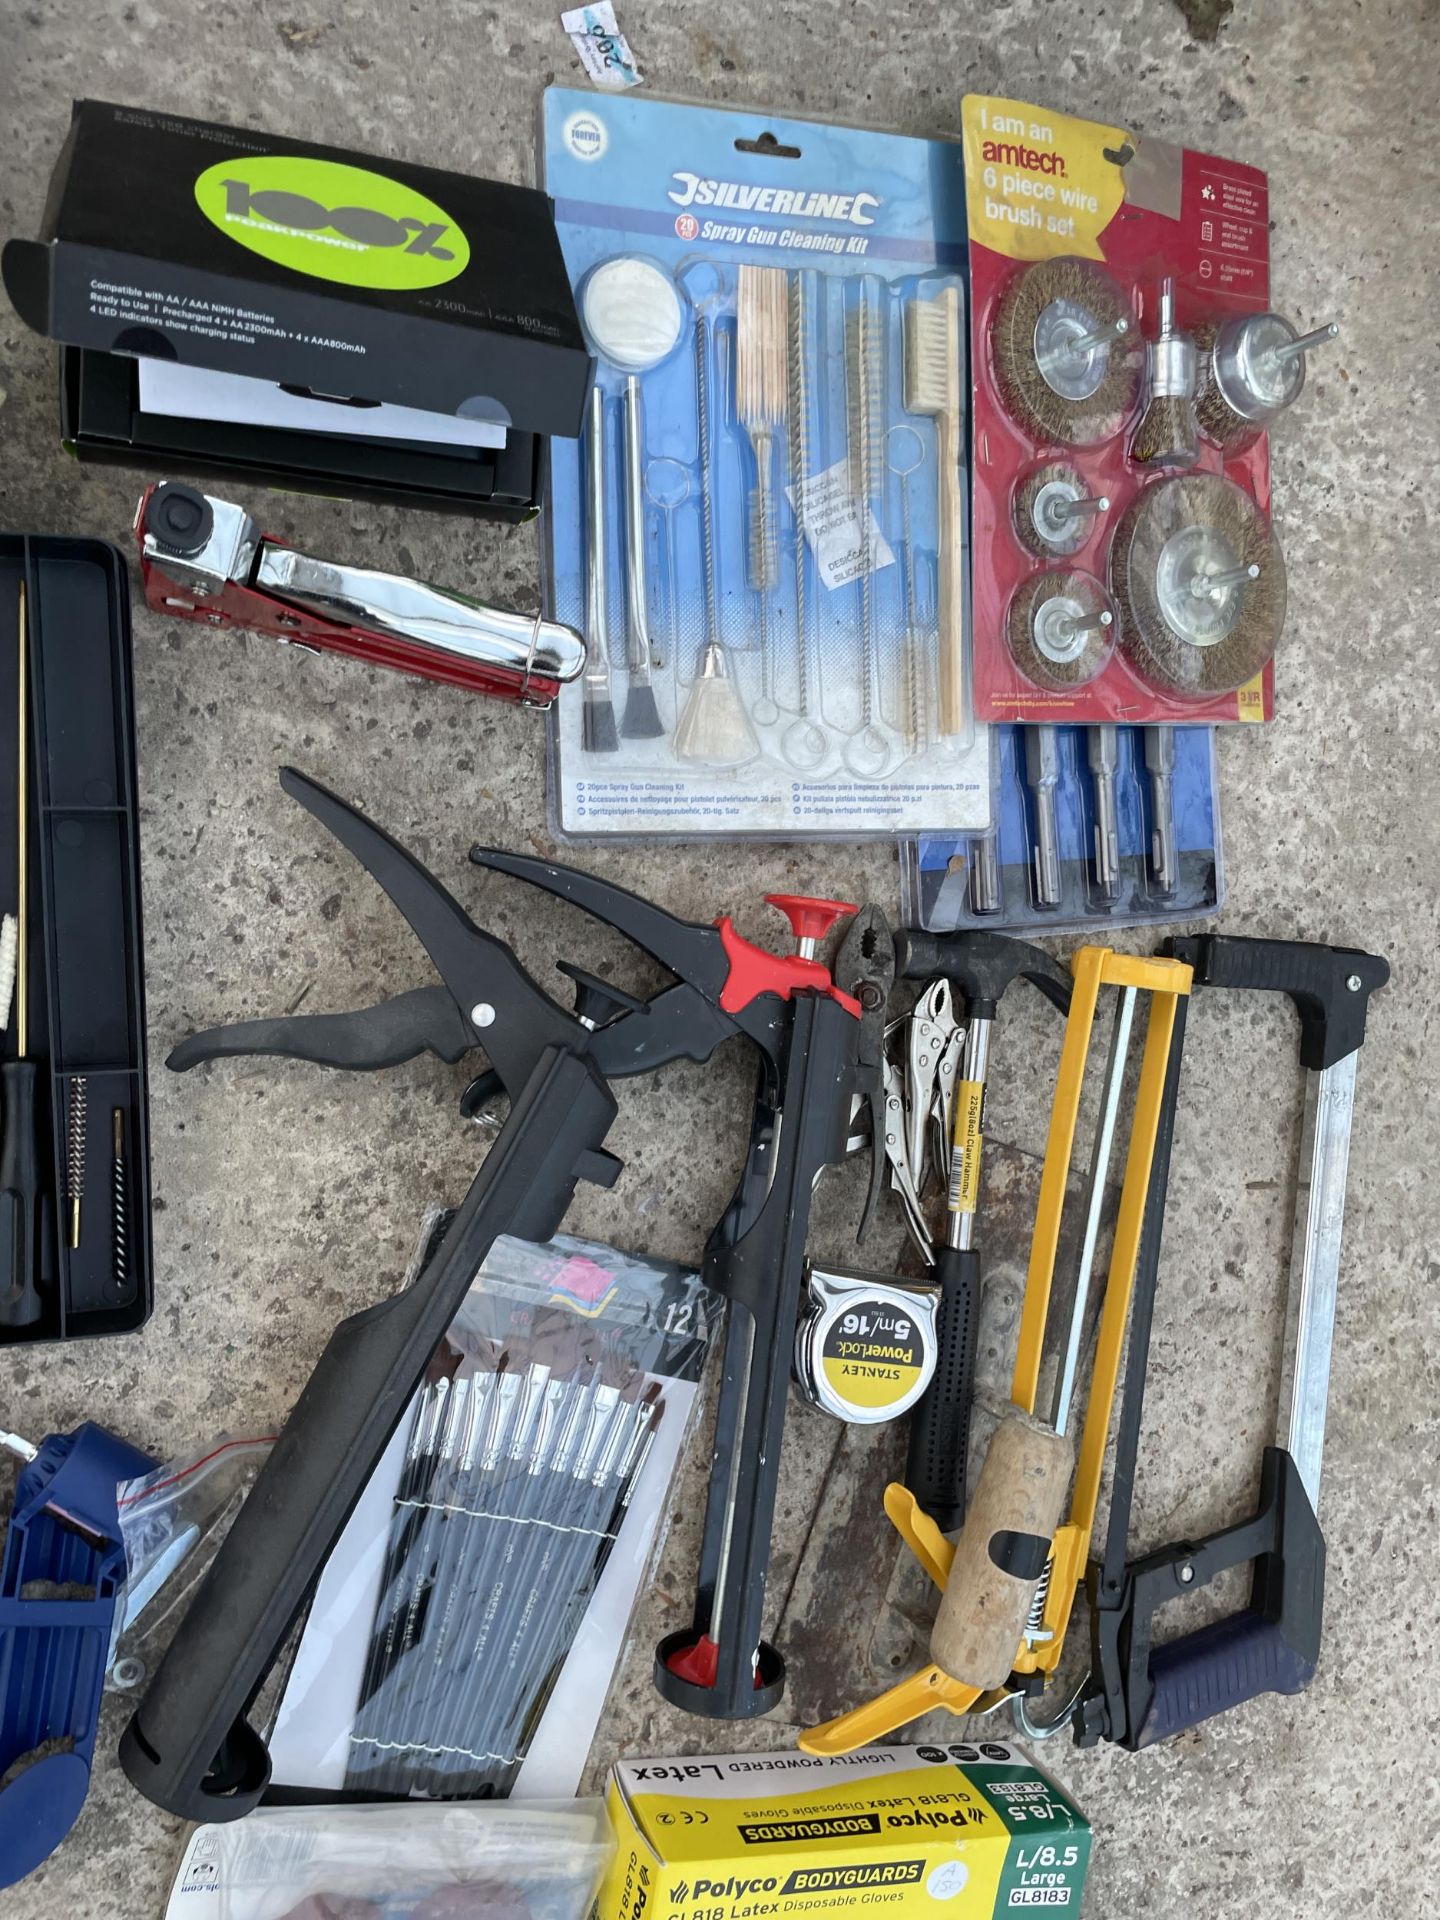 A LKARGE ASSORTMENT OF TOOLS TO INCLUDE DRILL BITS, A WOOD PLANE AND PLIERS ETC - Image 3 of 3